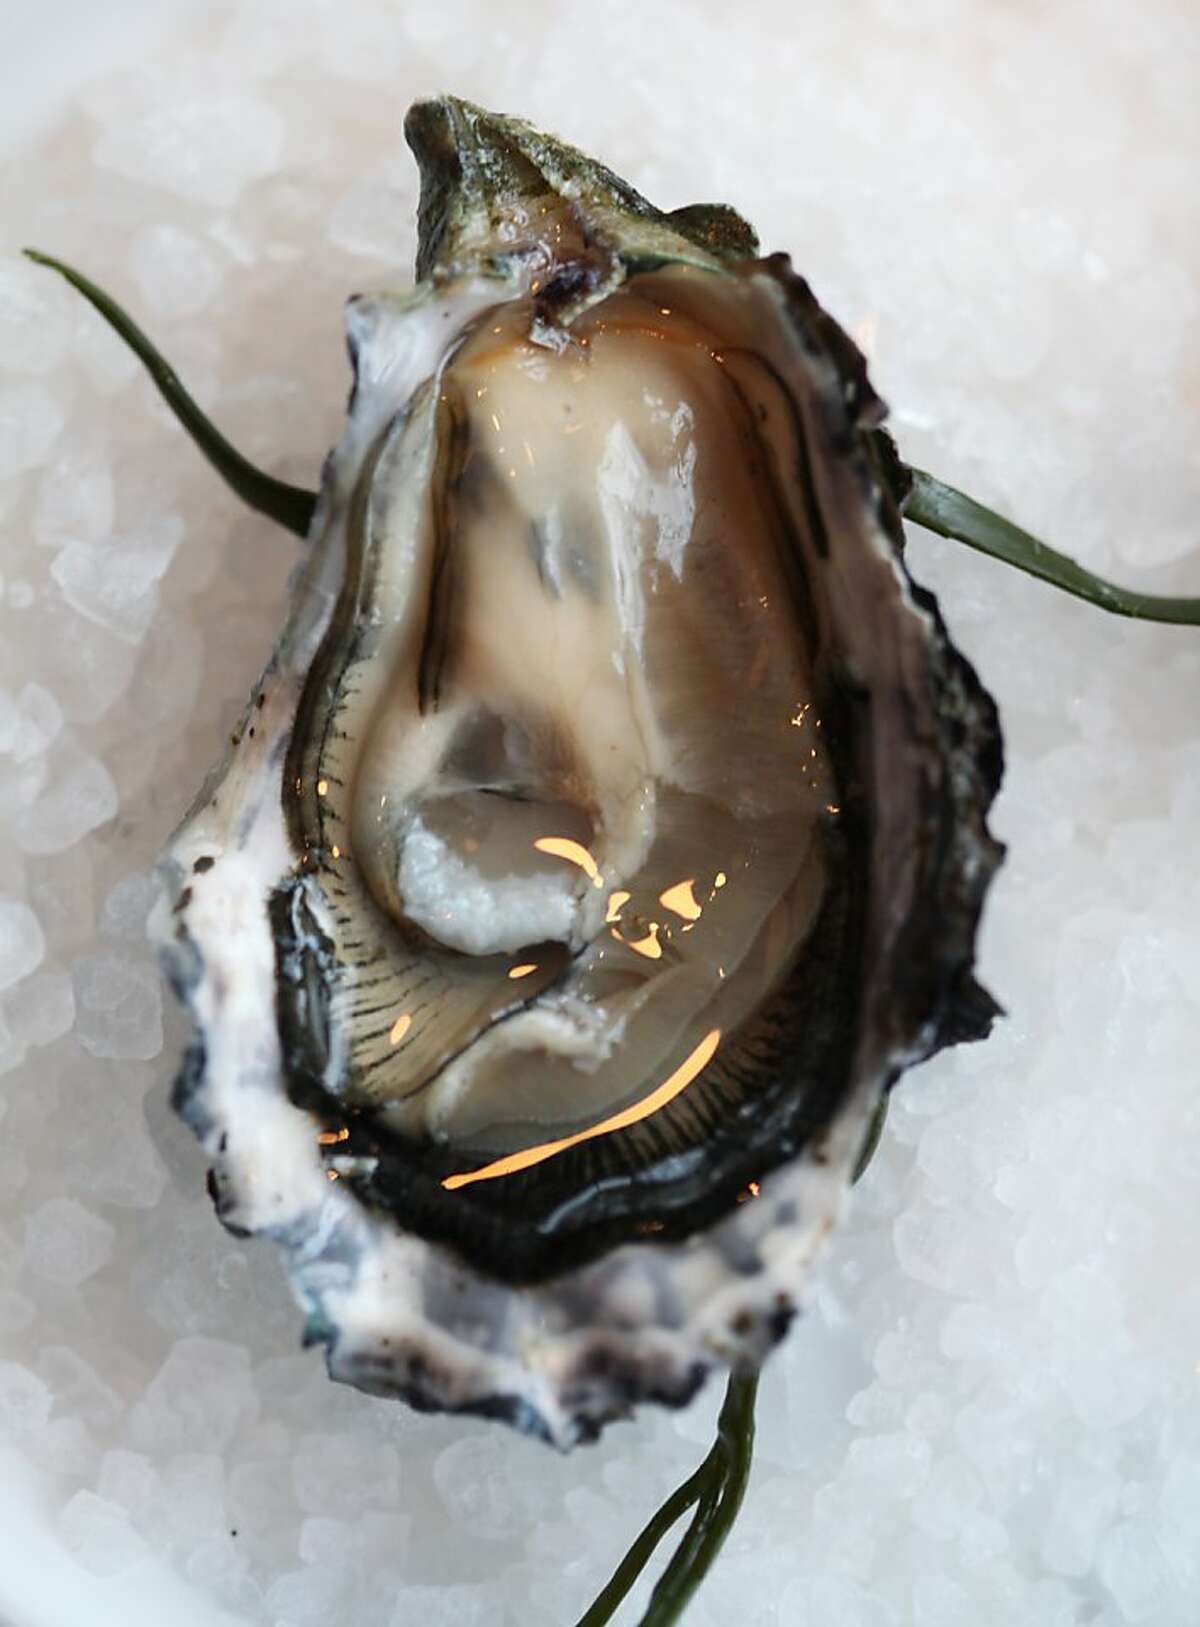 A shucked Drakes Bay oyster is seen at Waterbar on Thursday, November 29, 2012 in San Francisco, Calif.